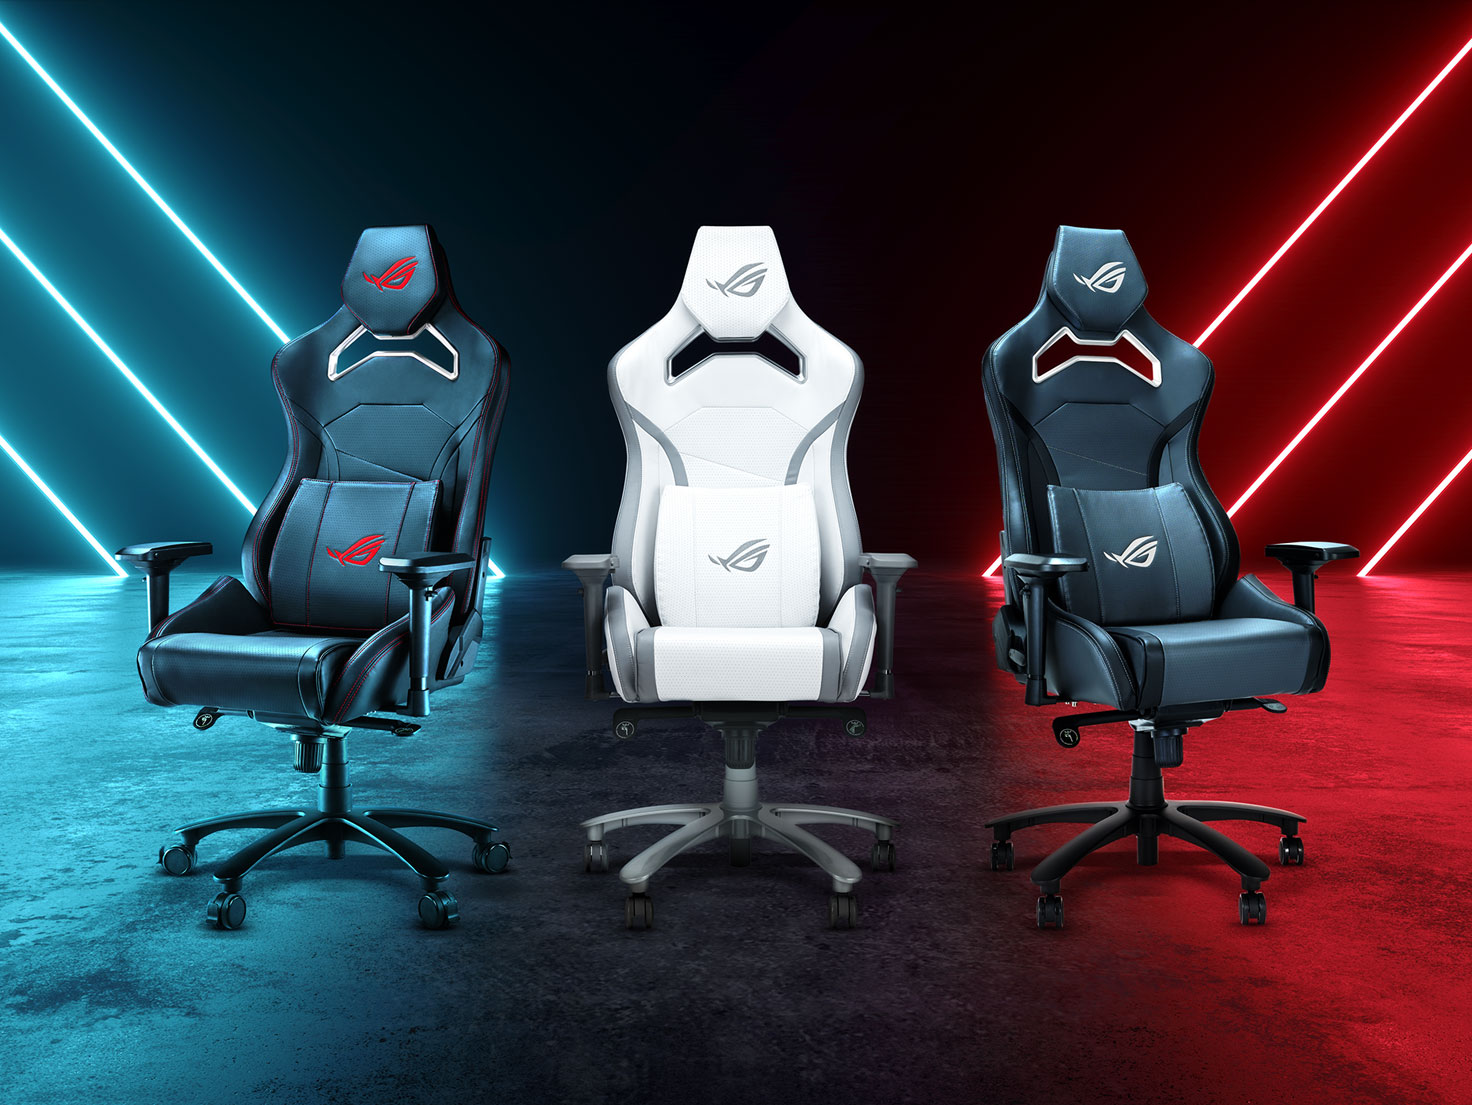 Three Chariot X Core gaming chair in black, grey, and white variations side by side.